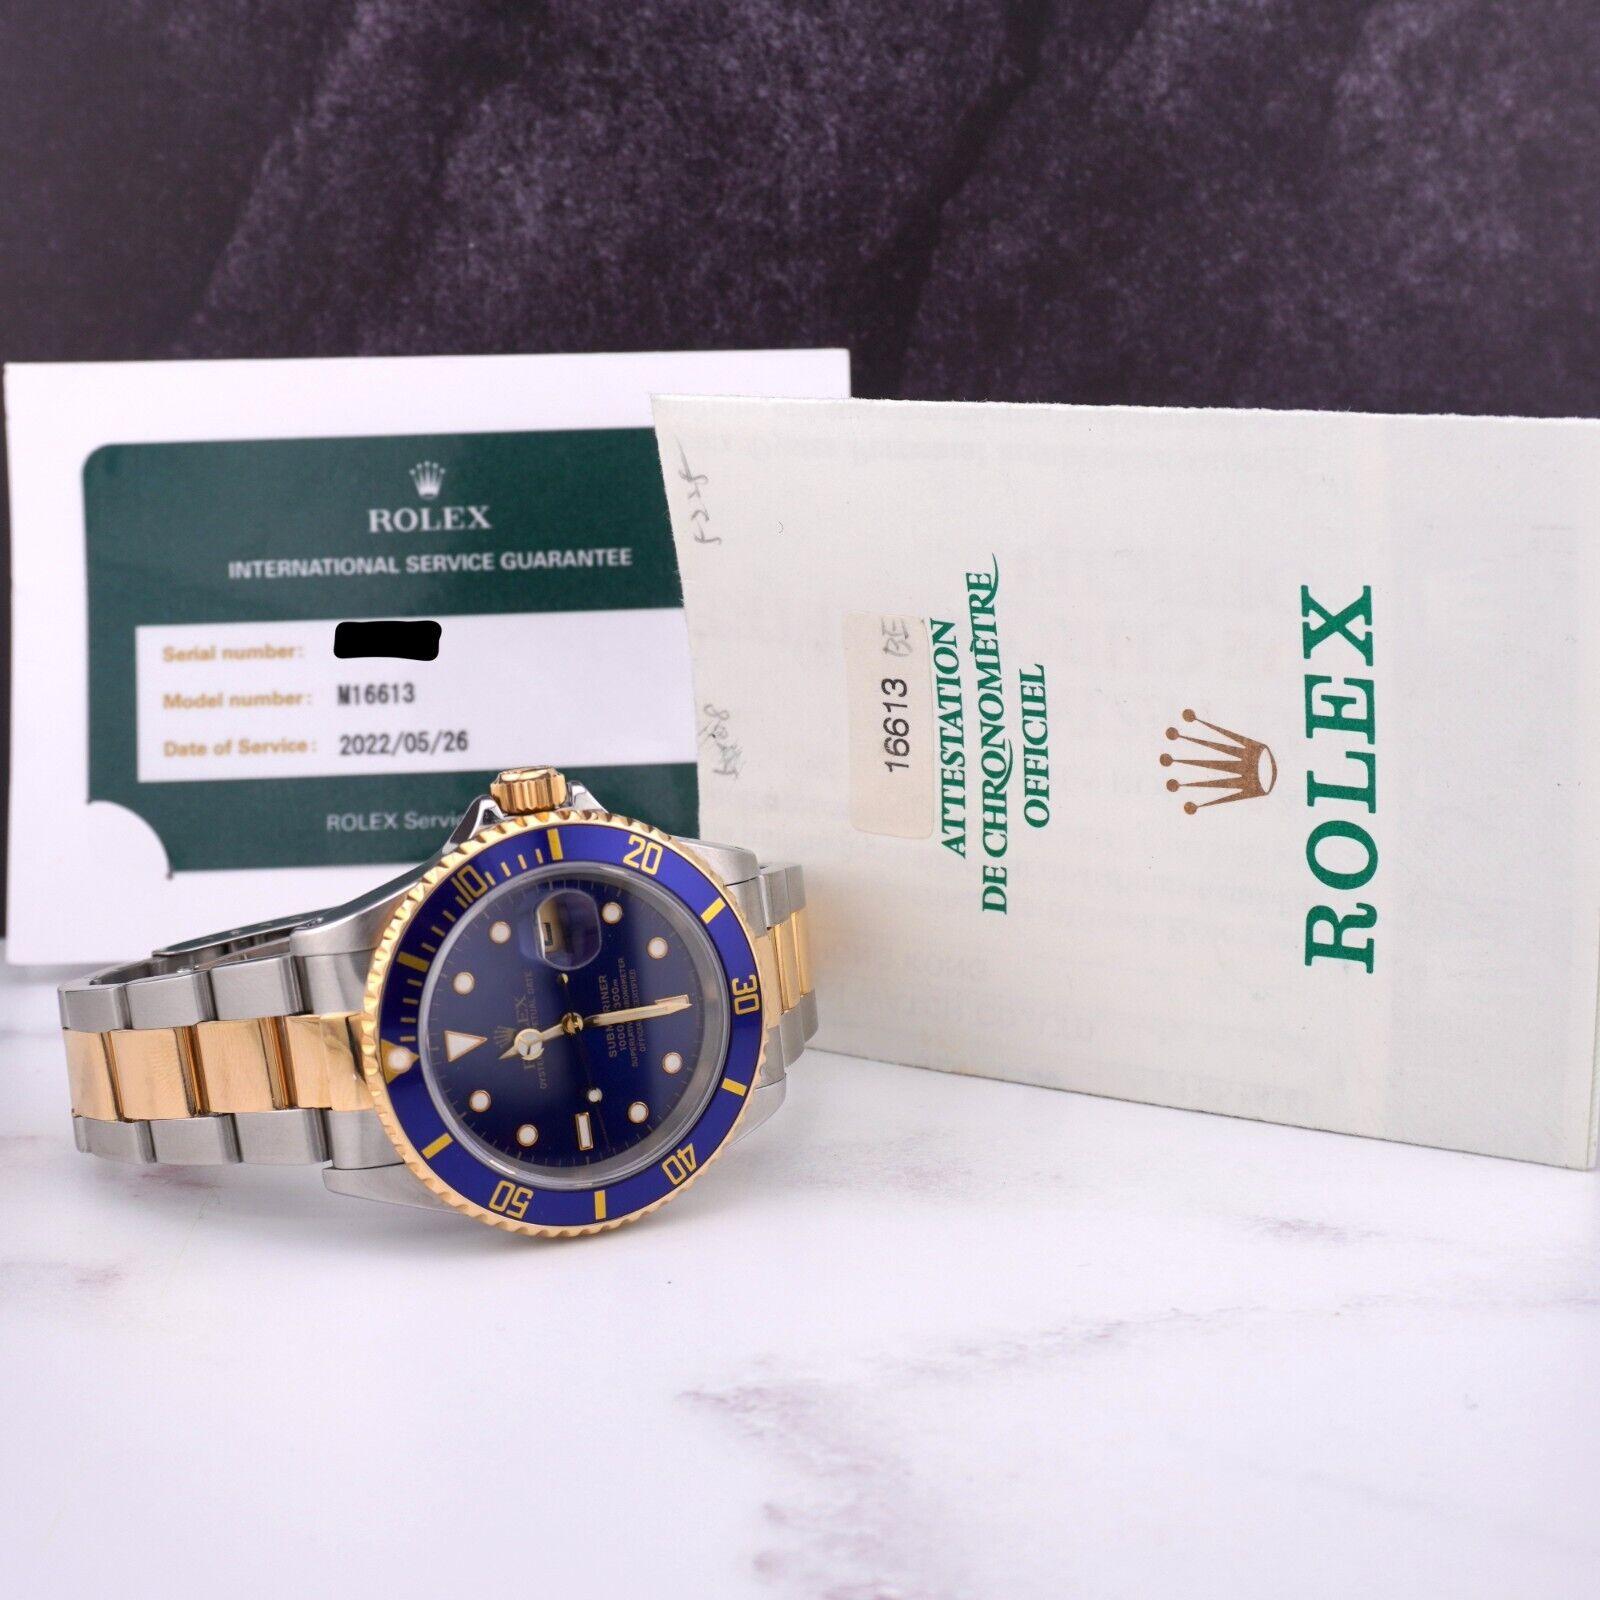 Rolex Submariner Date 40mm 18k Yellow Gold & Steel BLUE Dial Oyster Watch 16613 For Sale 2